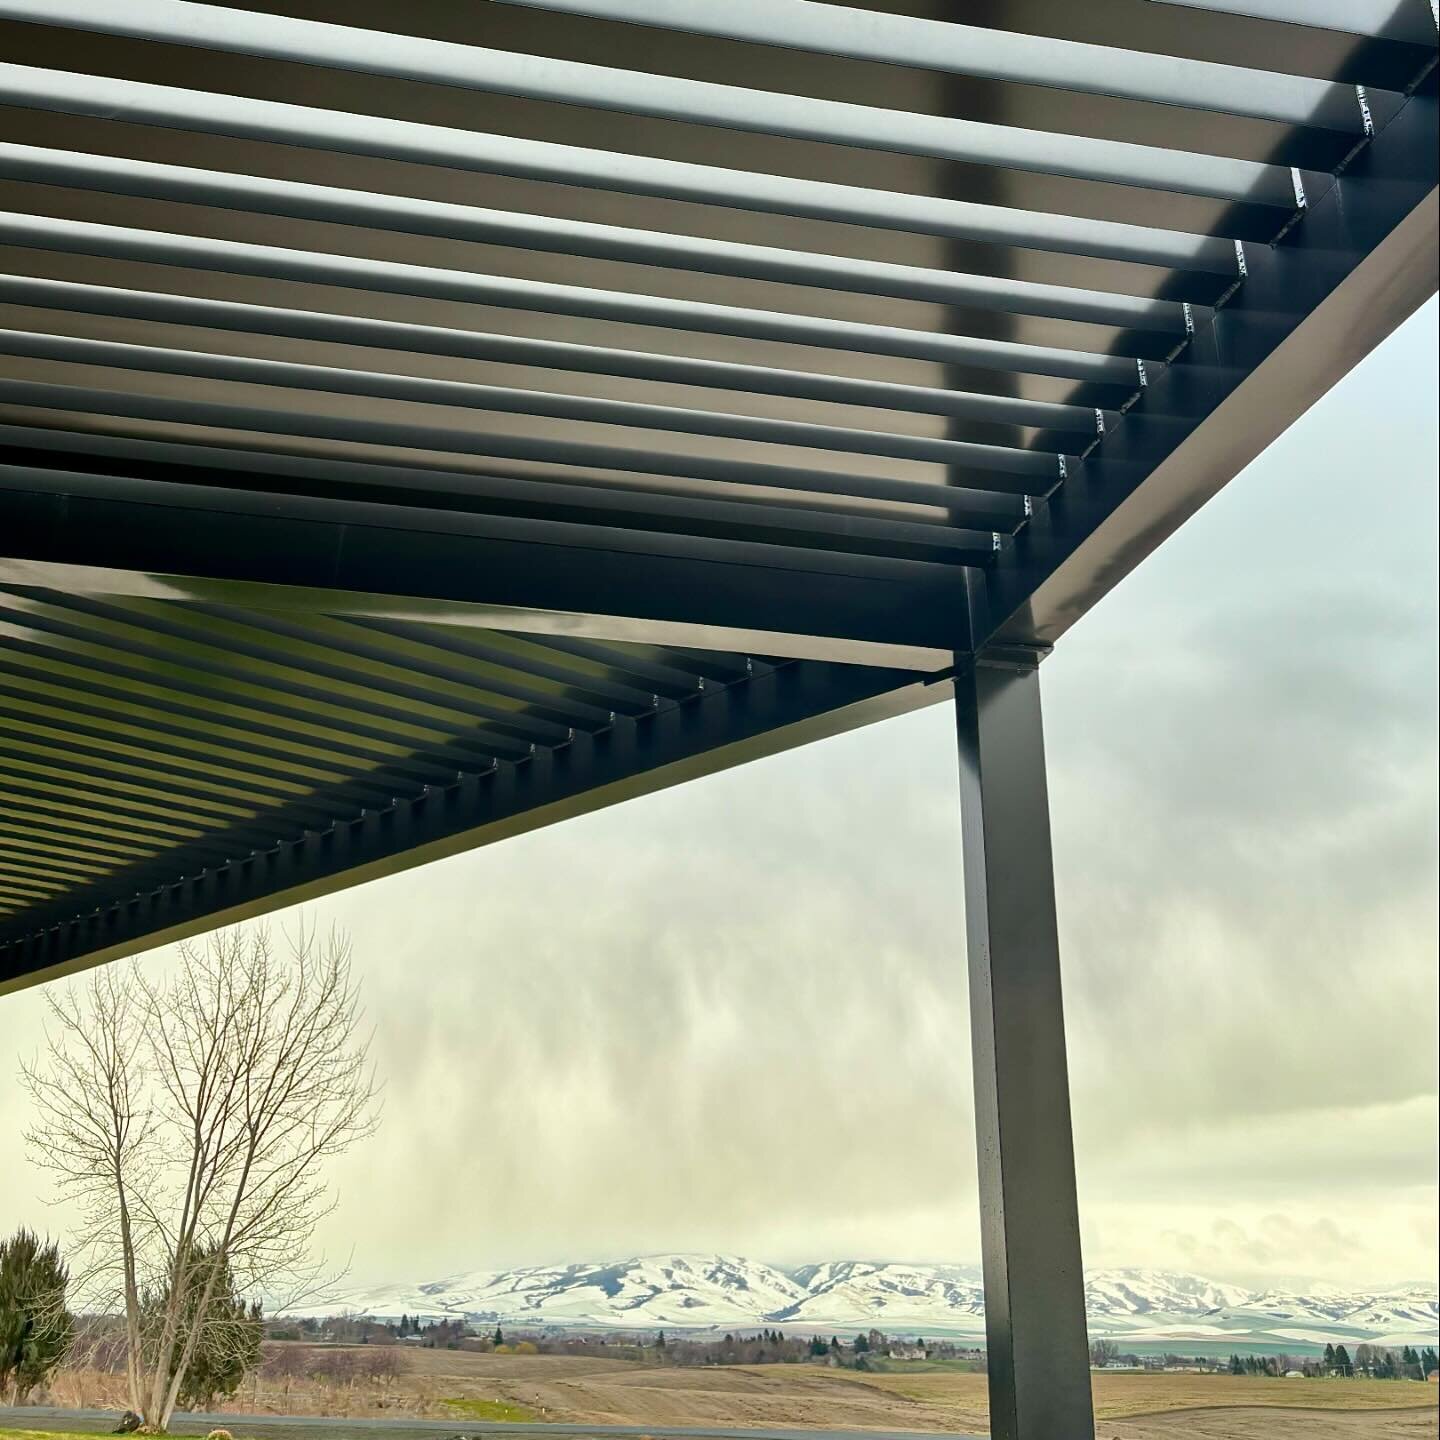 Excited for our clients to enjoy their new outdoor kitchen. With this custom designed and built shade structure they will be able to entertain year-round! Stay tuned, more updates coming soon.

#outdoorkitchen#shadestructure#patiodesign#interiordesig